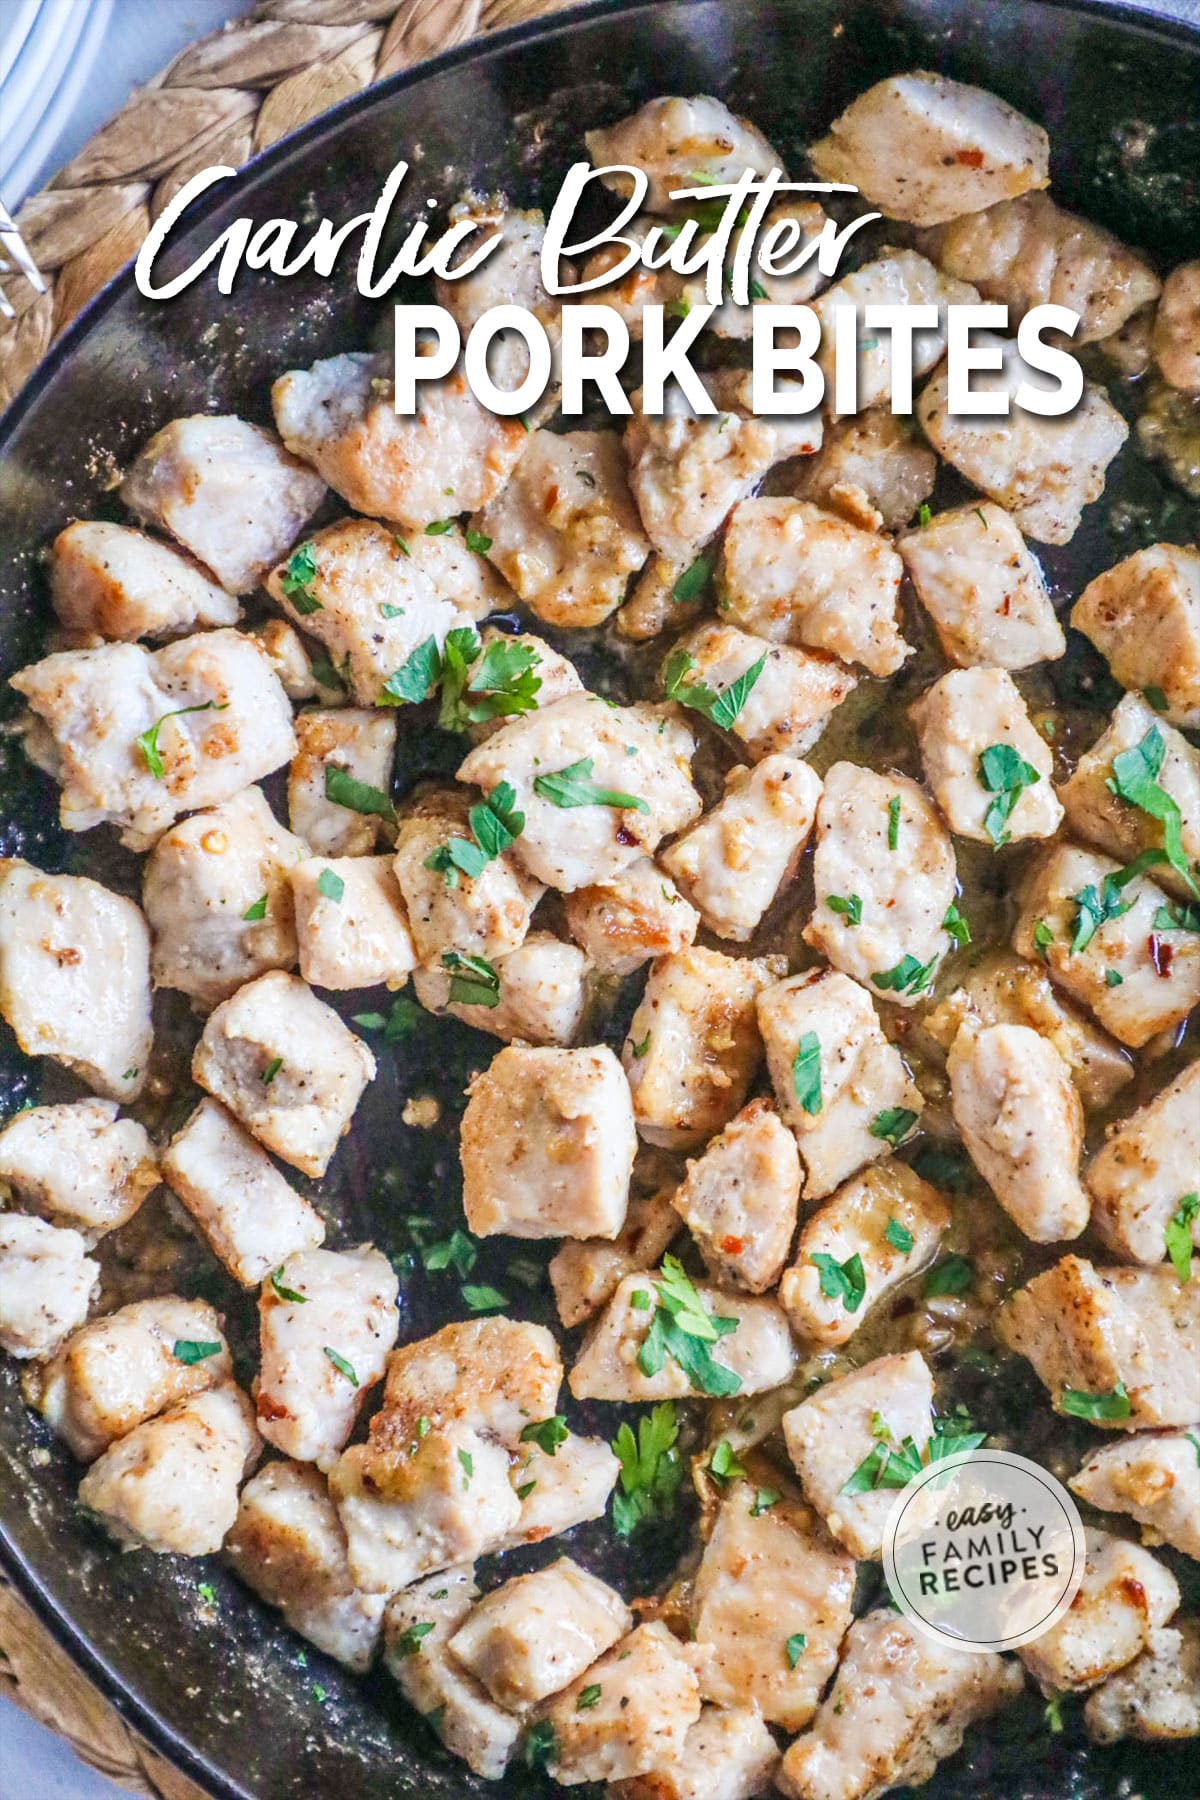 pork bites coated with garlic butter and sprinkled with parsley in a large pan.